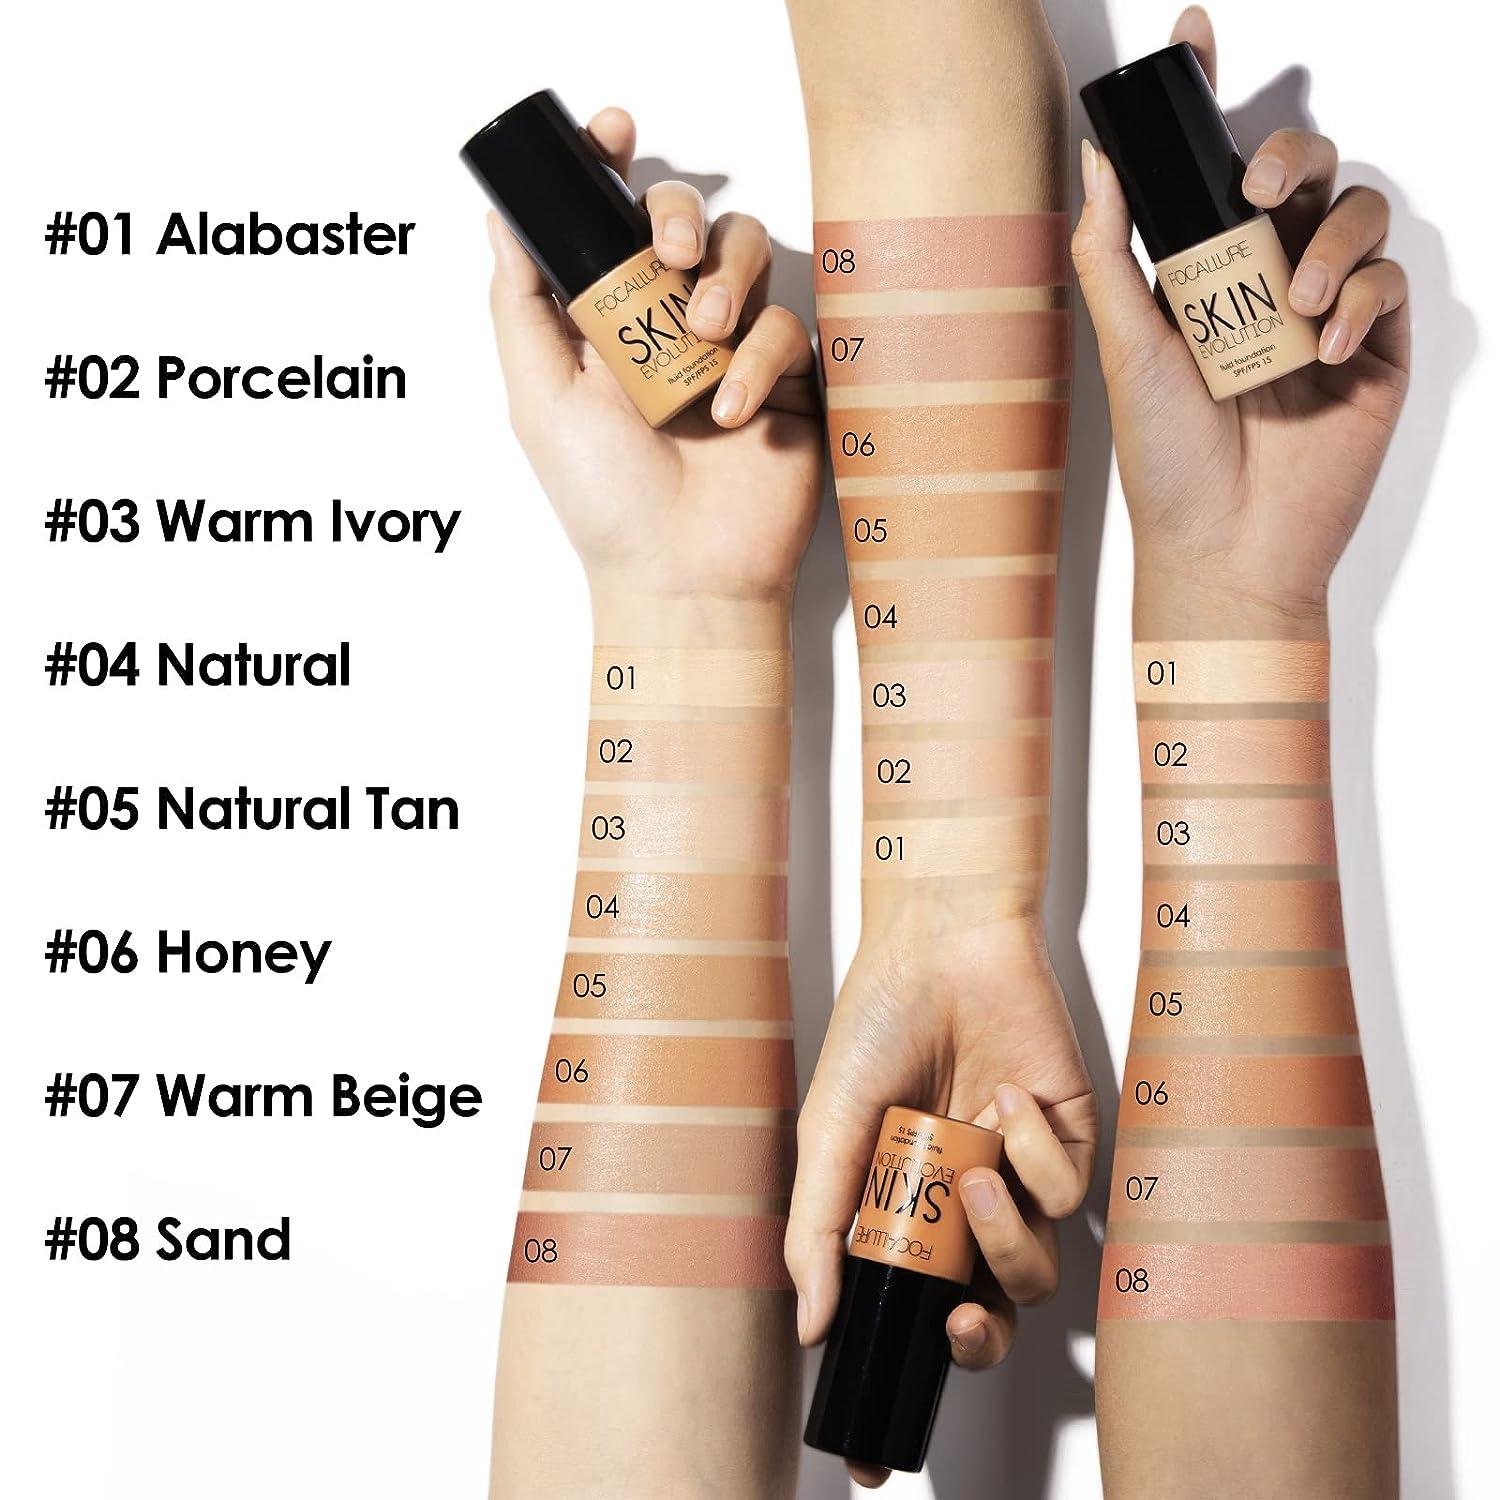 02 Ivory Perfect Coverage Concealer